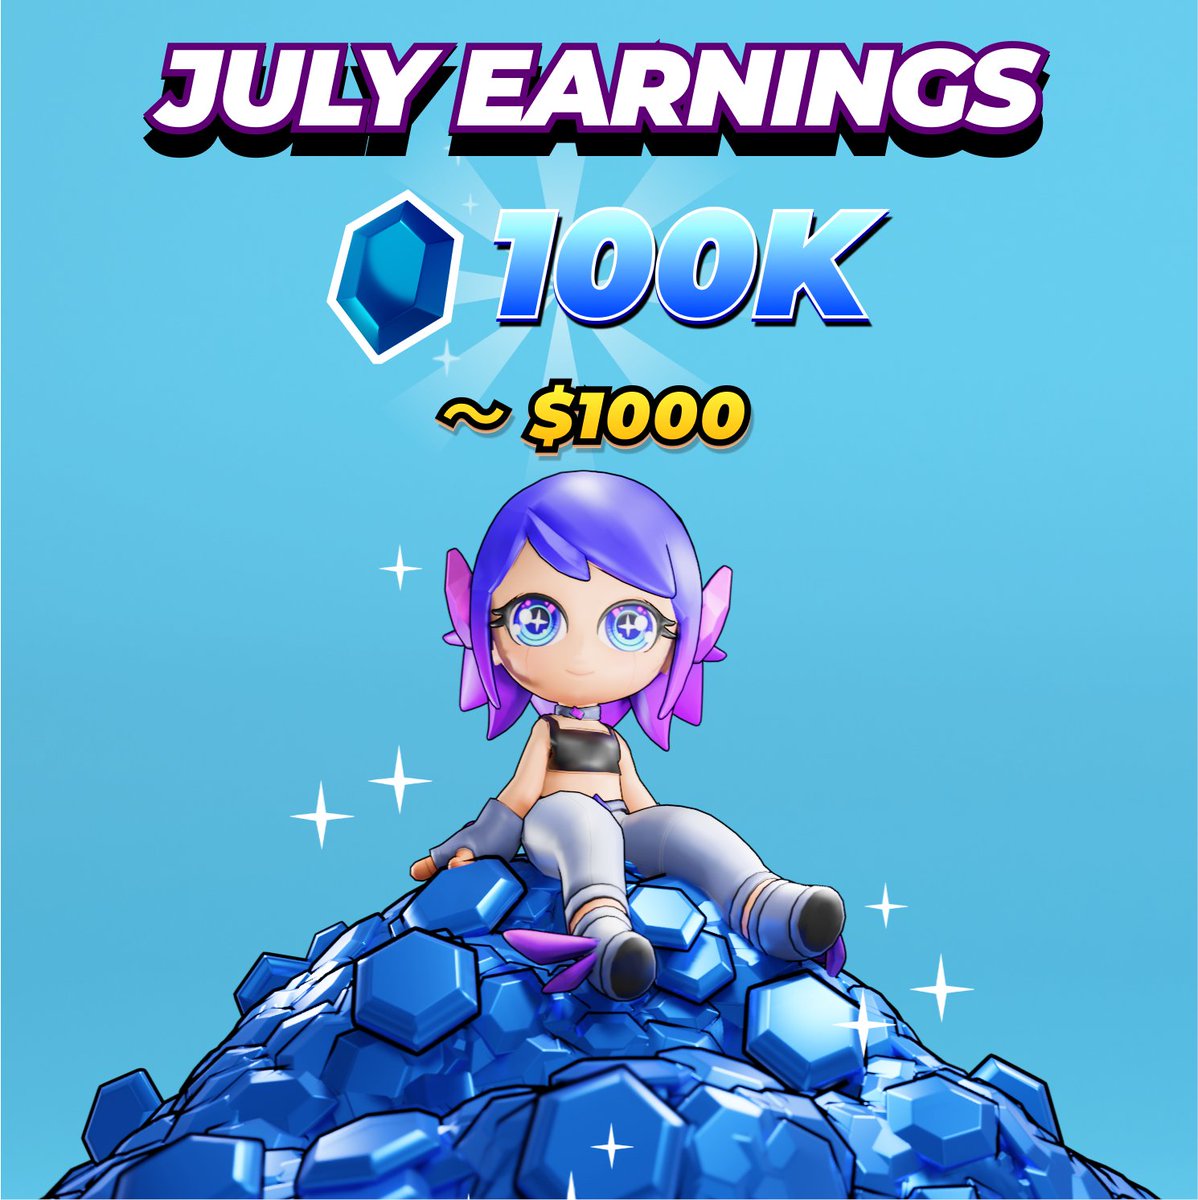 Over $1000 for prizes were distributed last month 💰 Hooray to our Yumonerz for earning their Gems! 💎💎💎 🔥 Compete now and claim yours 🔥 Download Chill Ride (iOS + Android): links.yumon.world/games